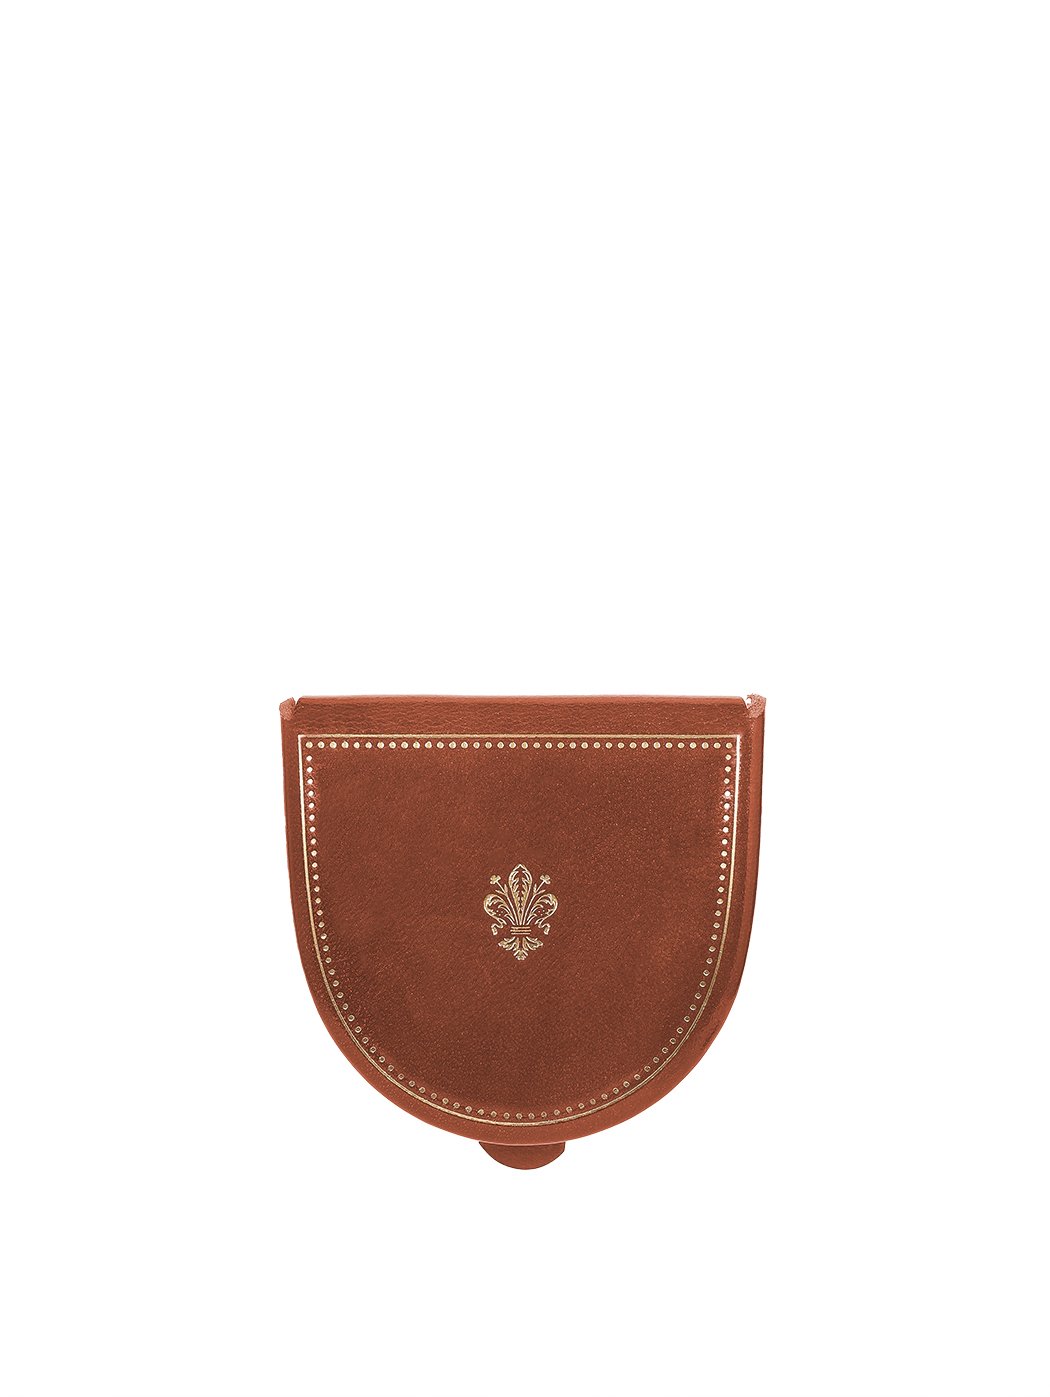 Florentine Lily Tacco Coin Pouch Natural Tan